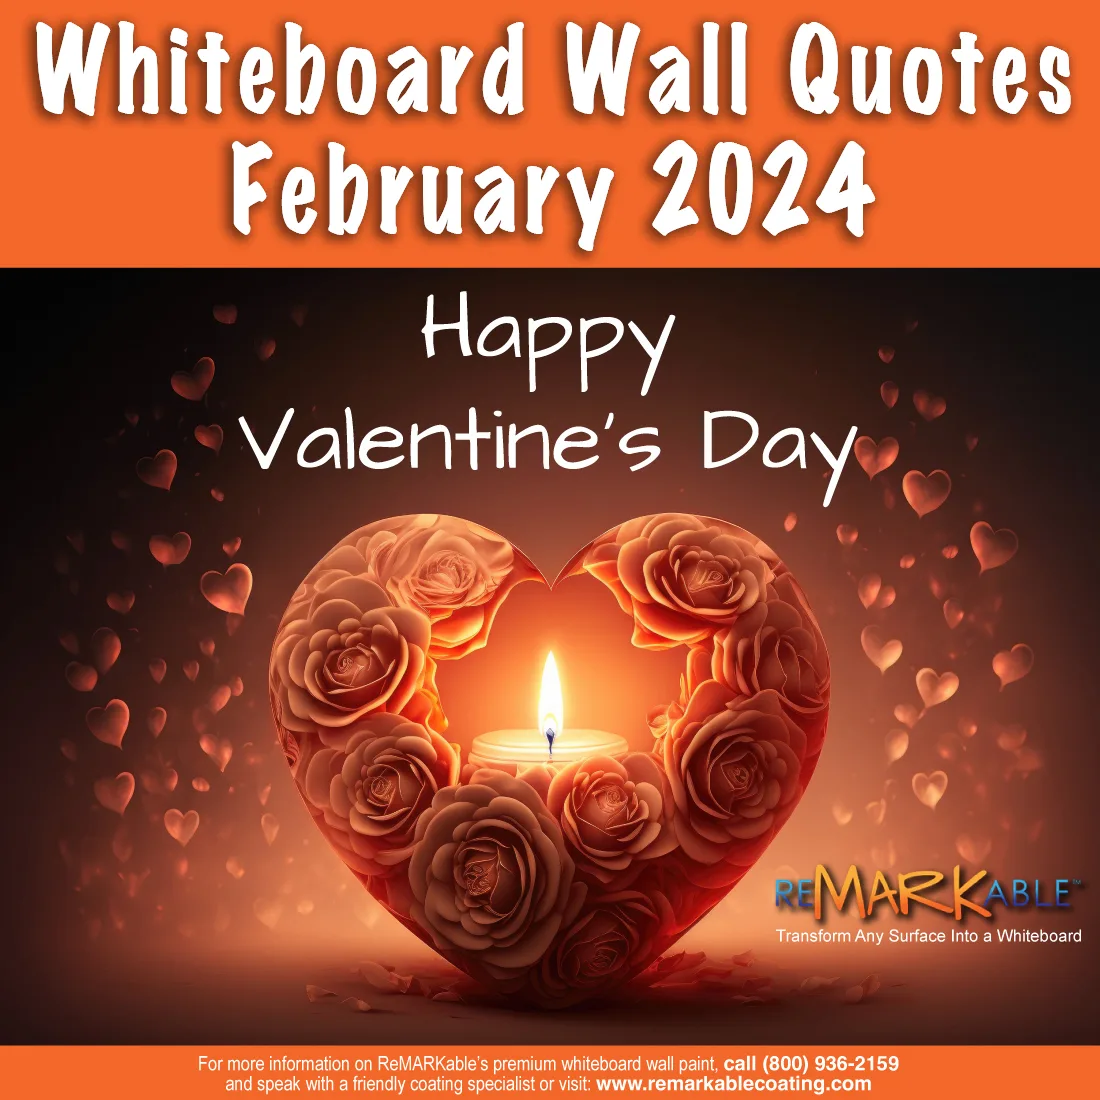 February Reflections: Quotes to Illuminate Your Whiteboard Wall